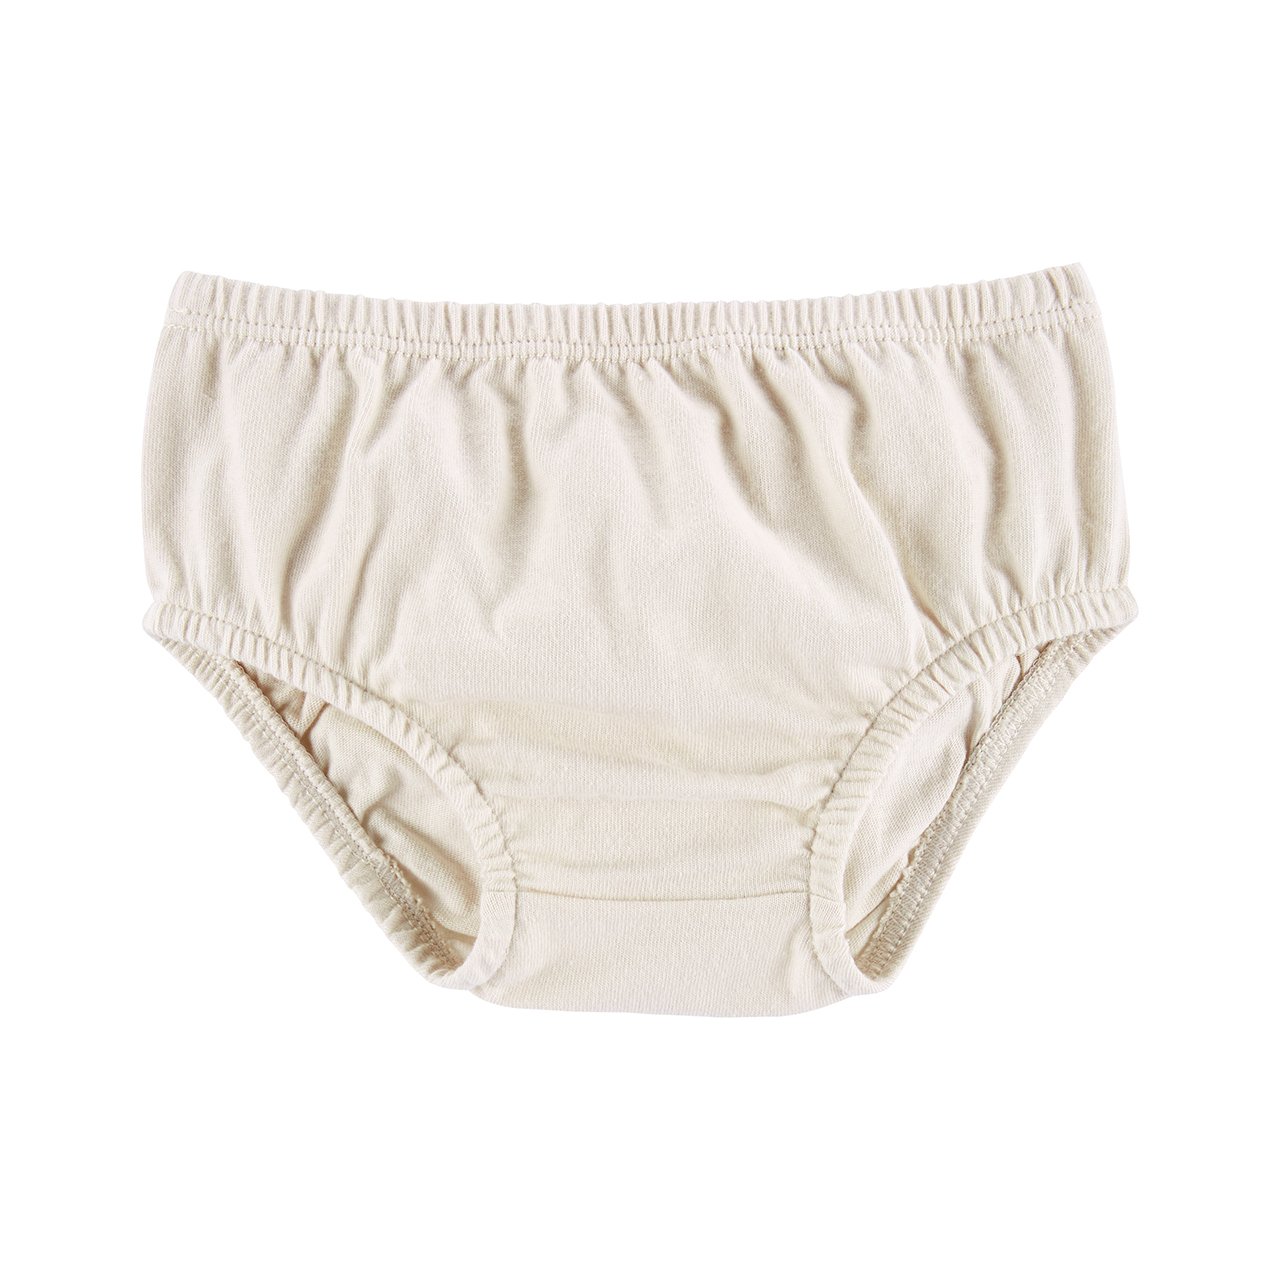 A pair of white underwear for babies.